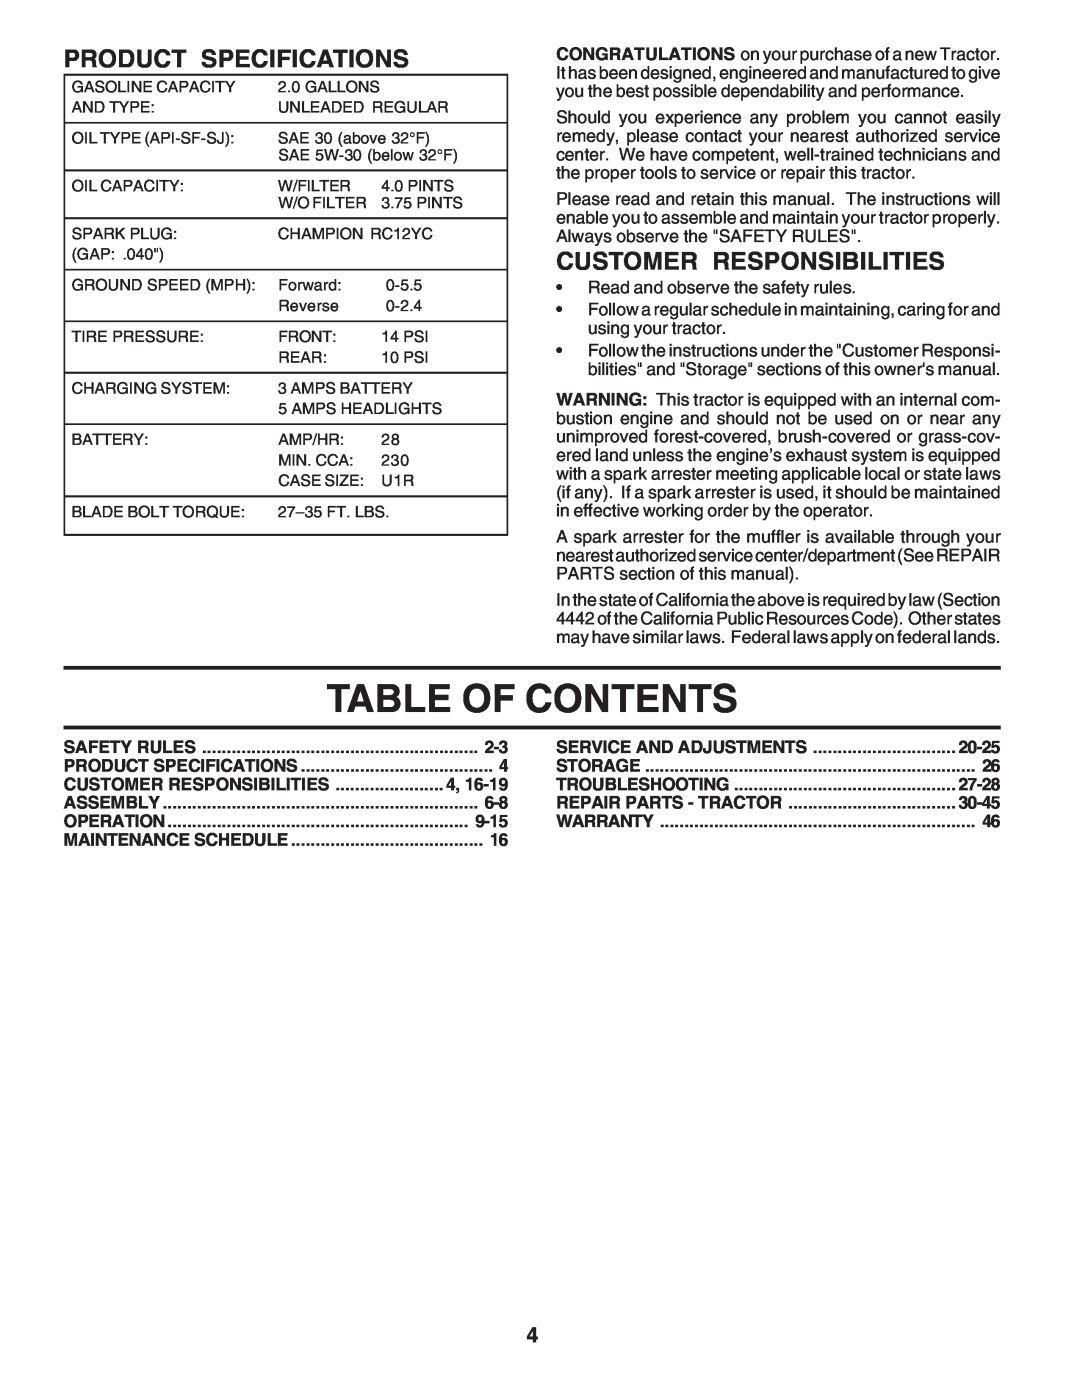 Poulan PPR20H42STB owner manual Table Of Contents, Product Specifications, Customer Responsibilities 